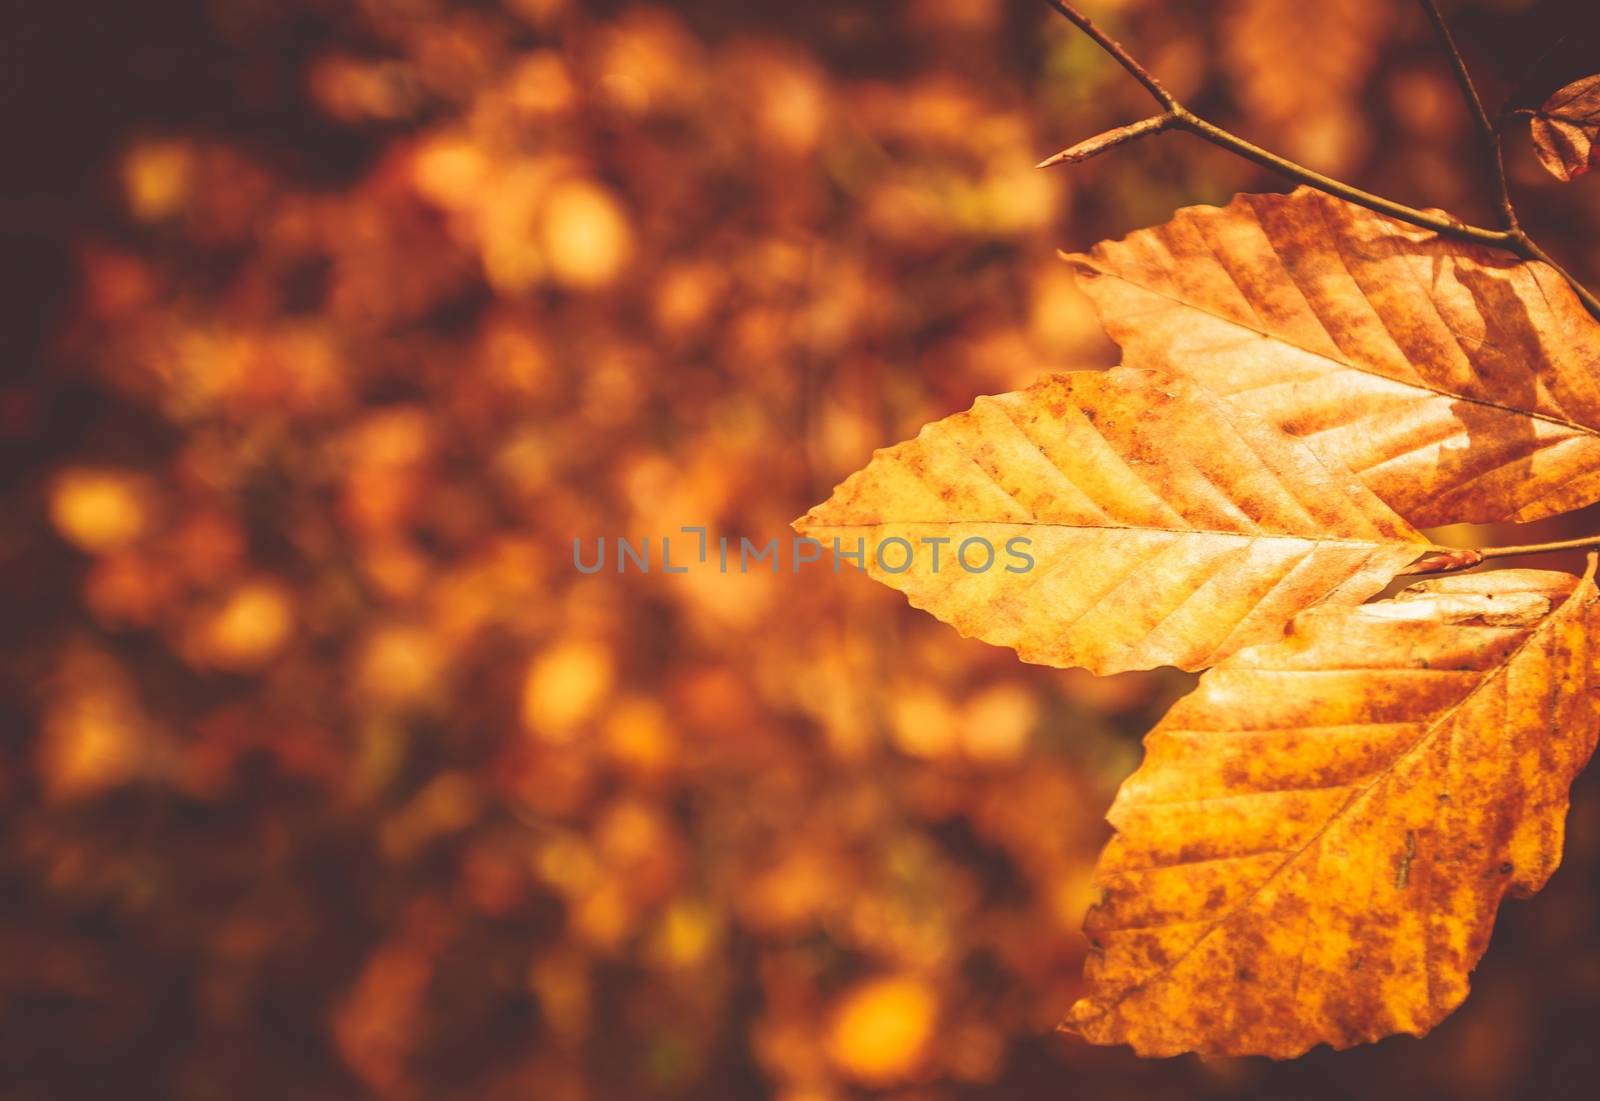 Fall Foliage Background by welcomia